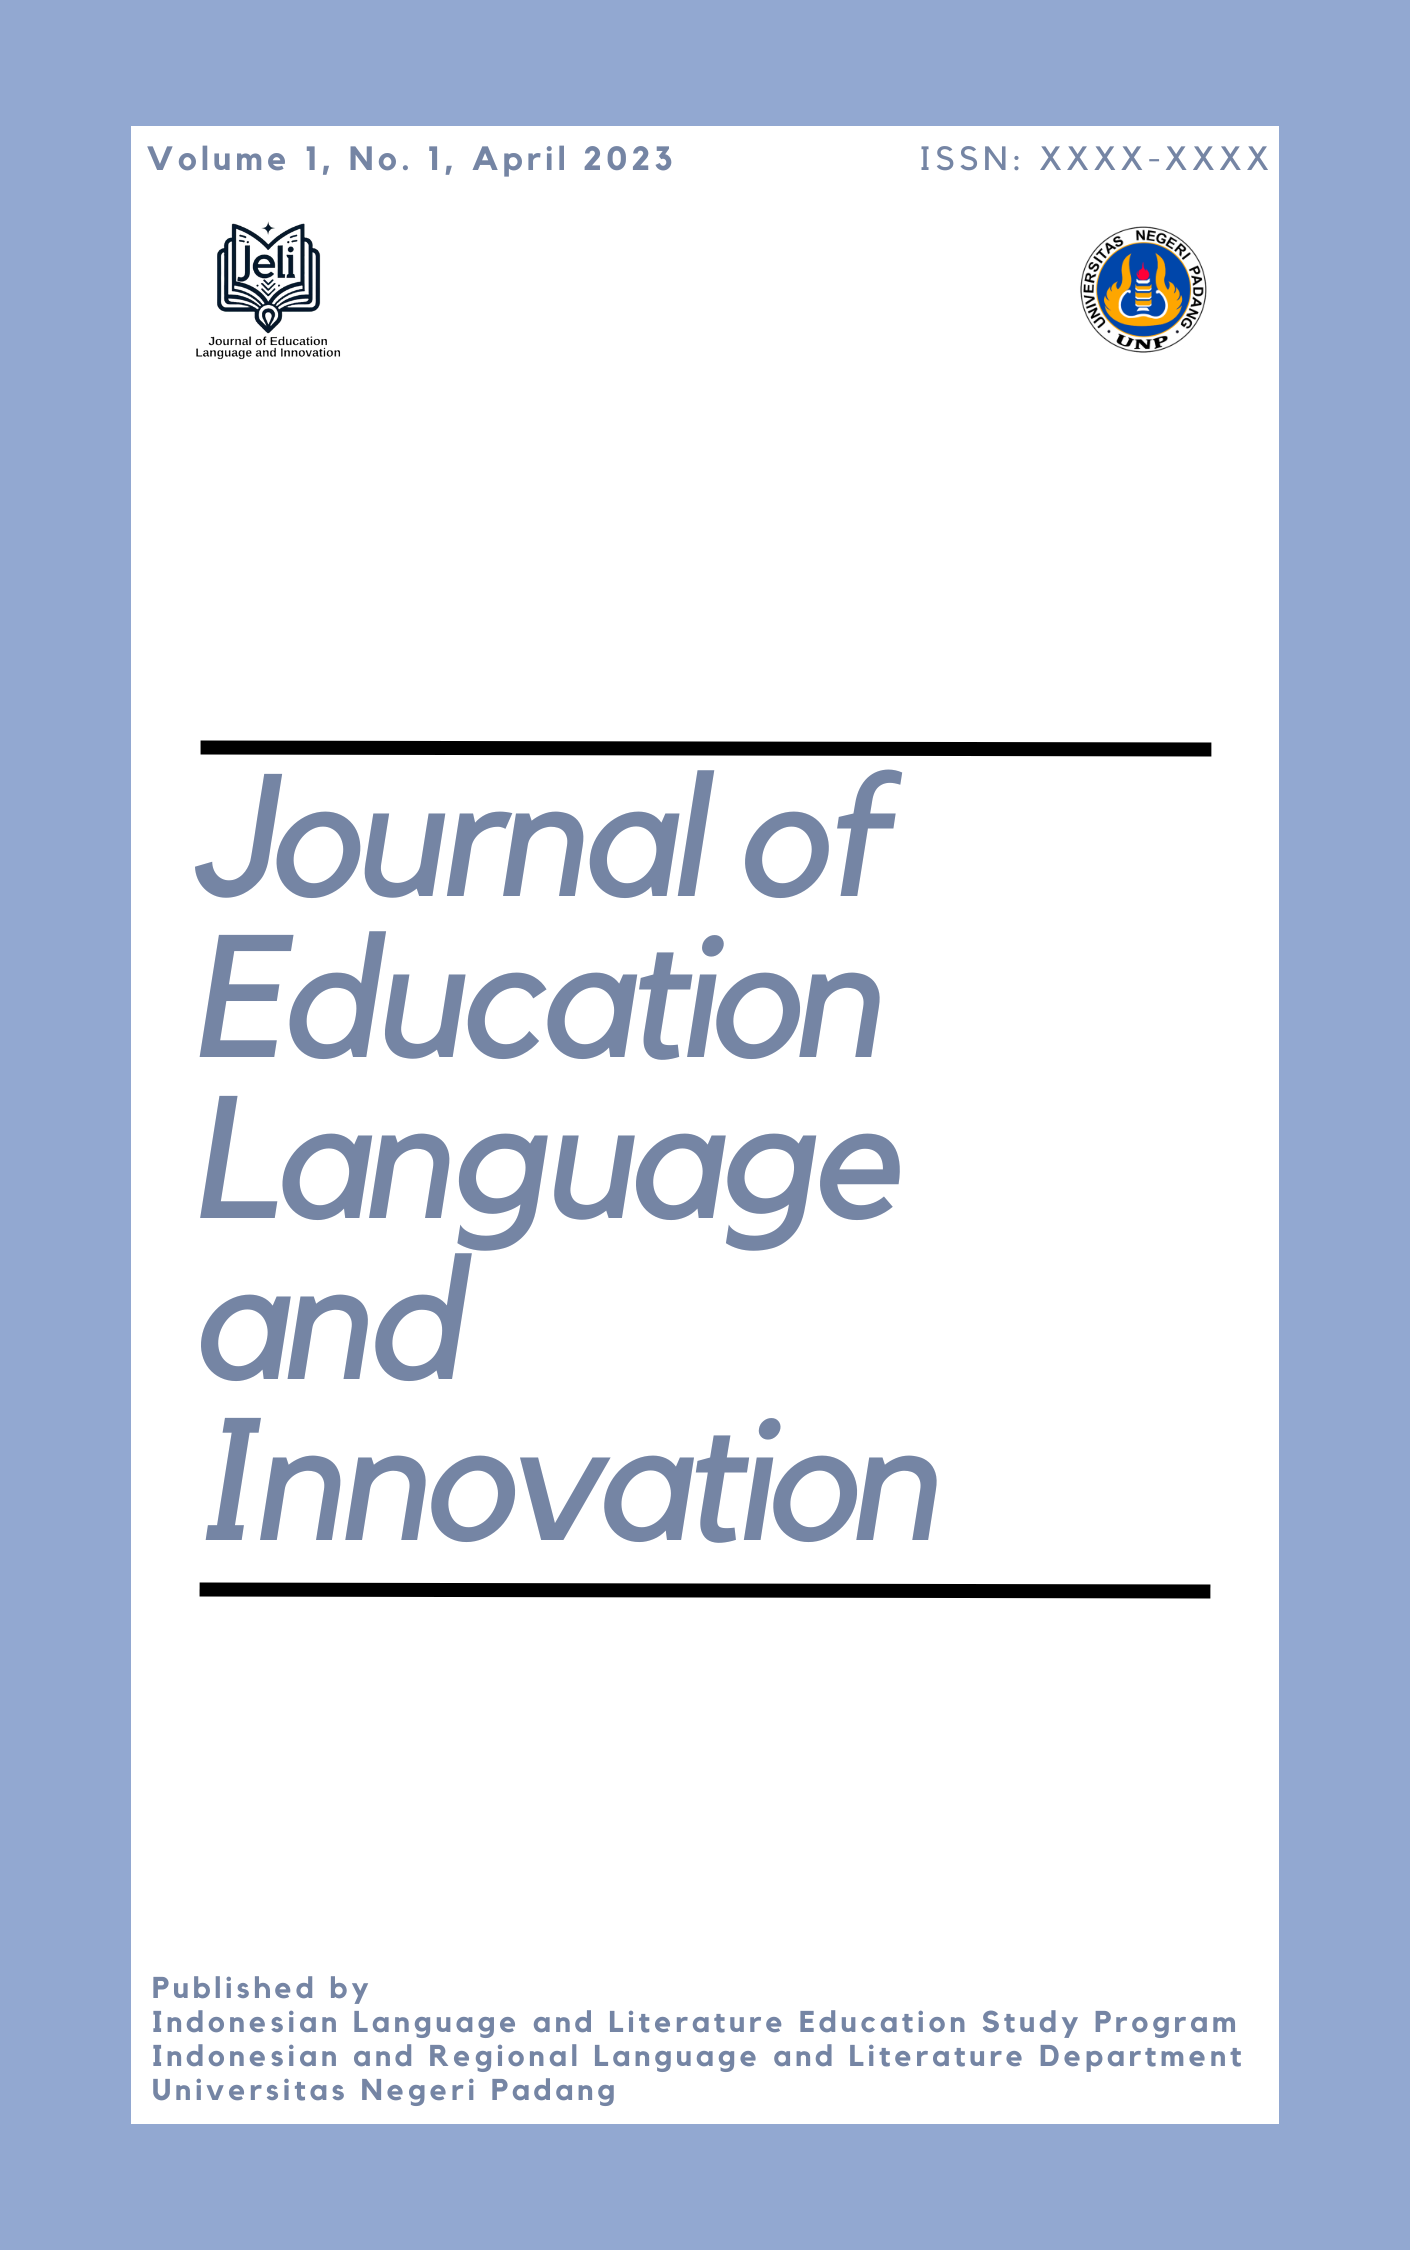 The cover page of JELI. It contains the name of the journal, the journal data including, volume, number, year of publication, and ISSN.